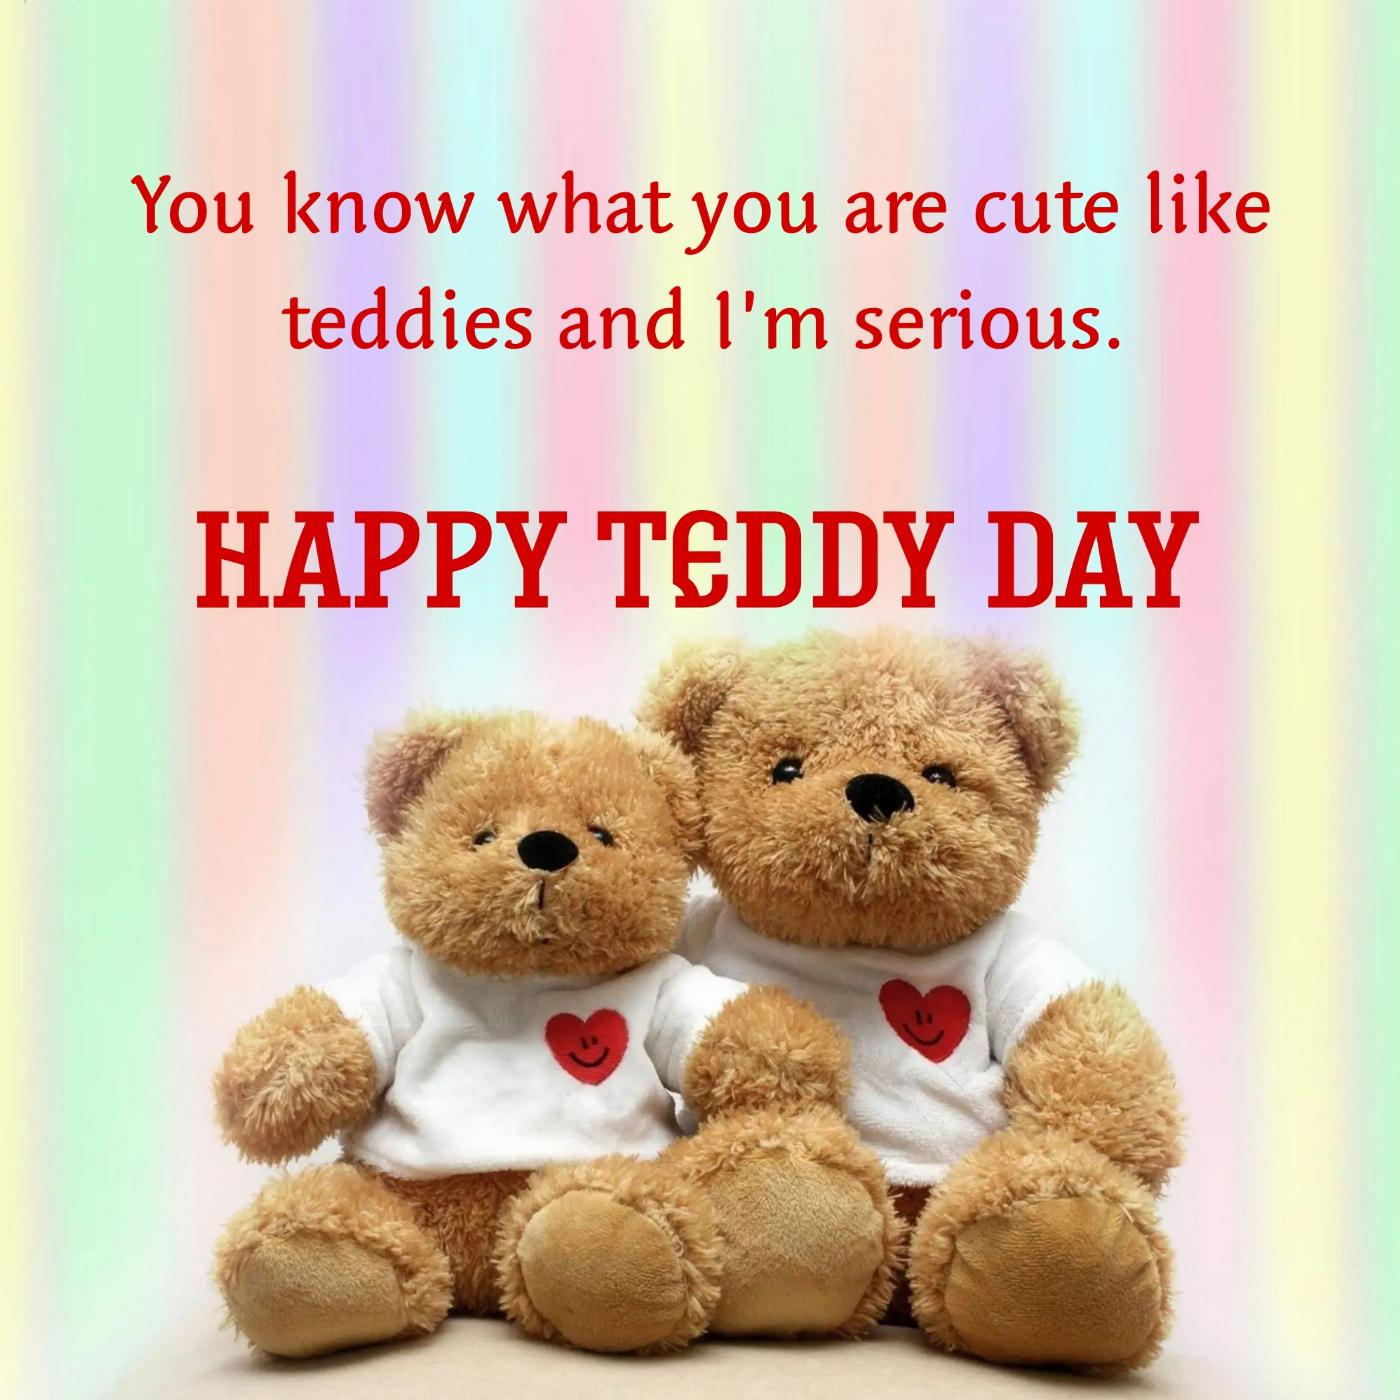 You know what you are cute like teddies and Im serious